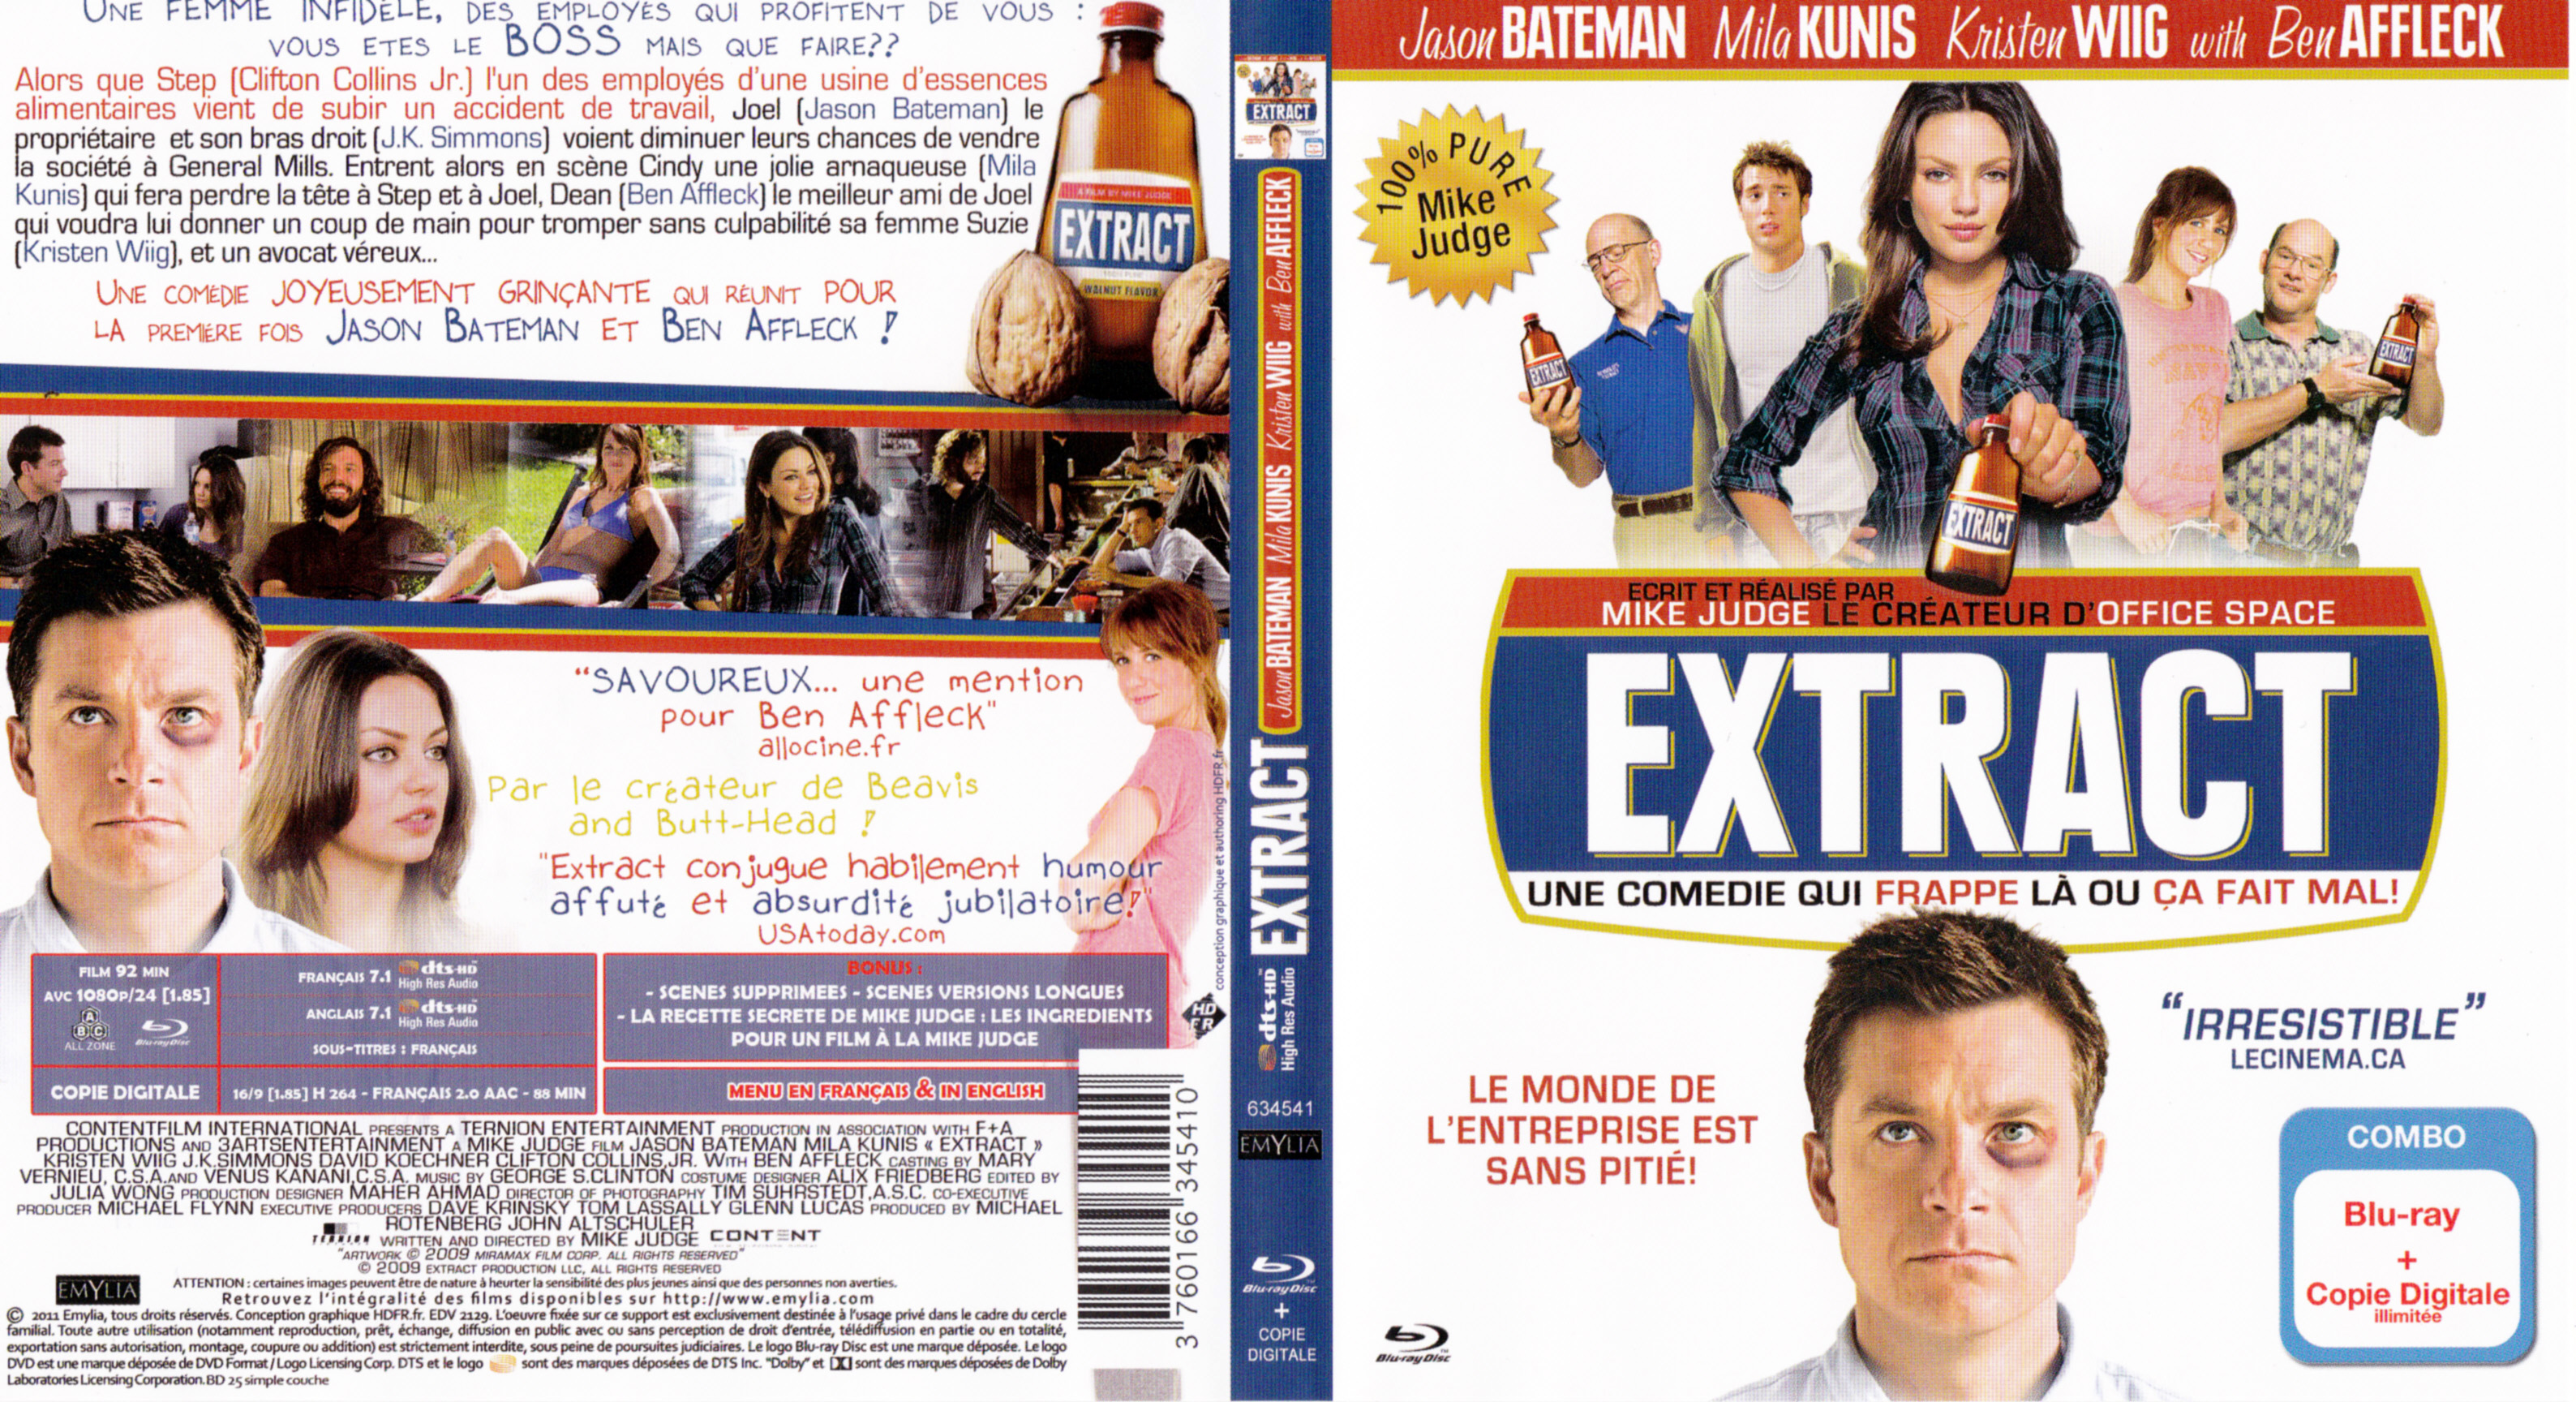 Jaquette DVD Extract (BLU-RAY)